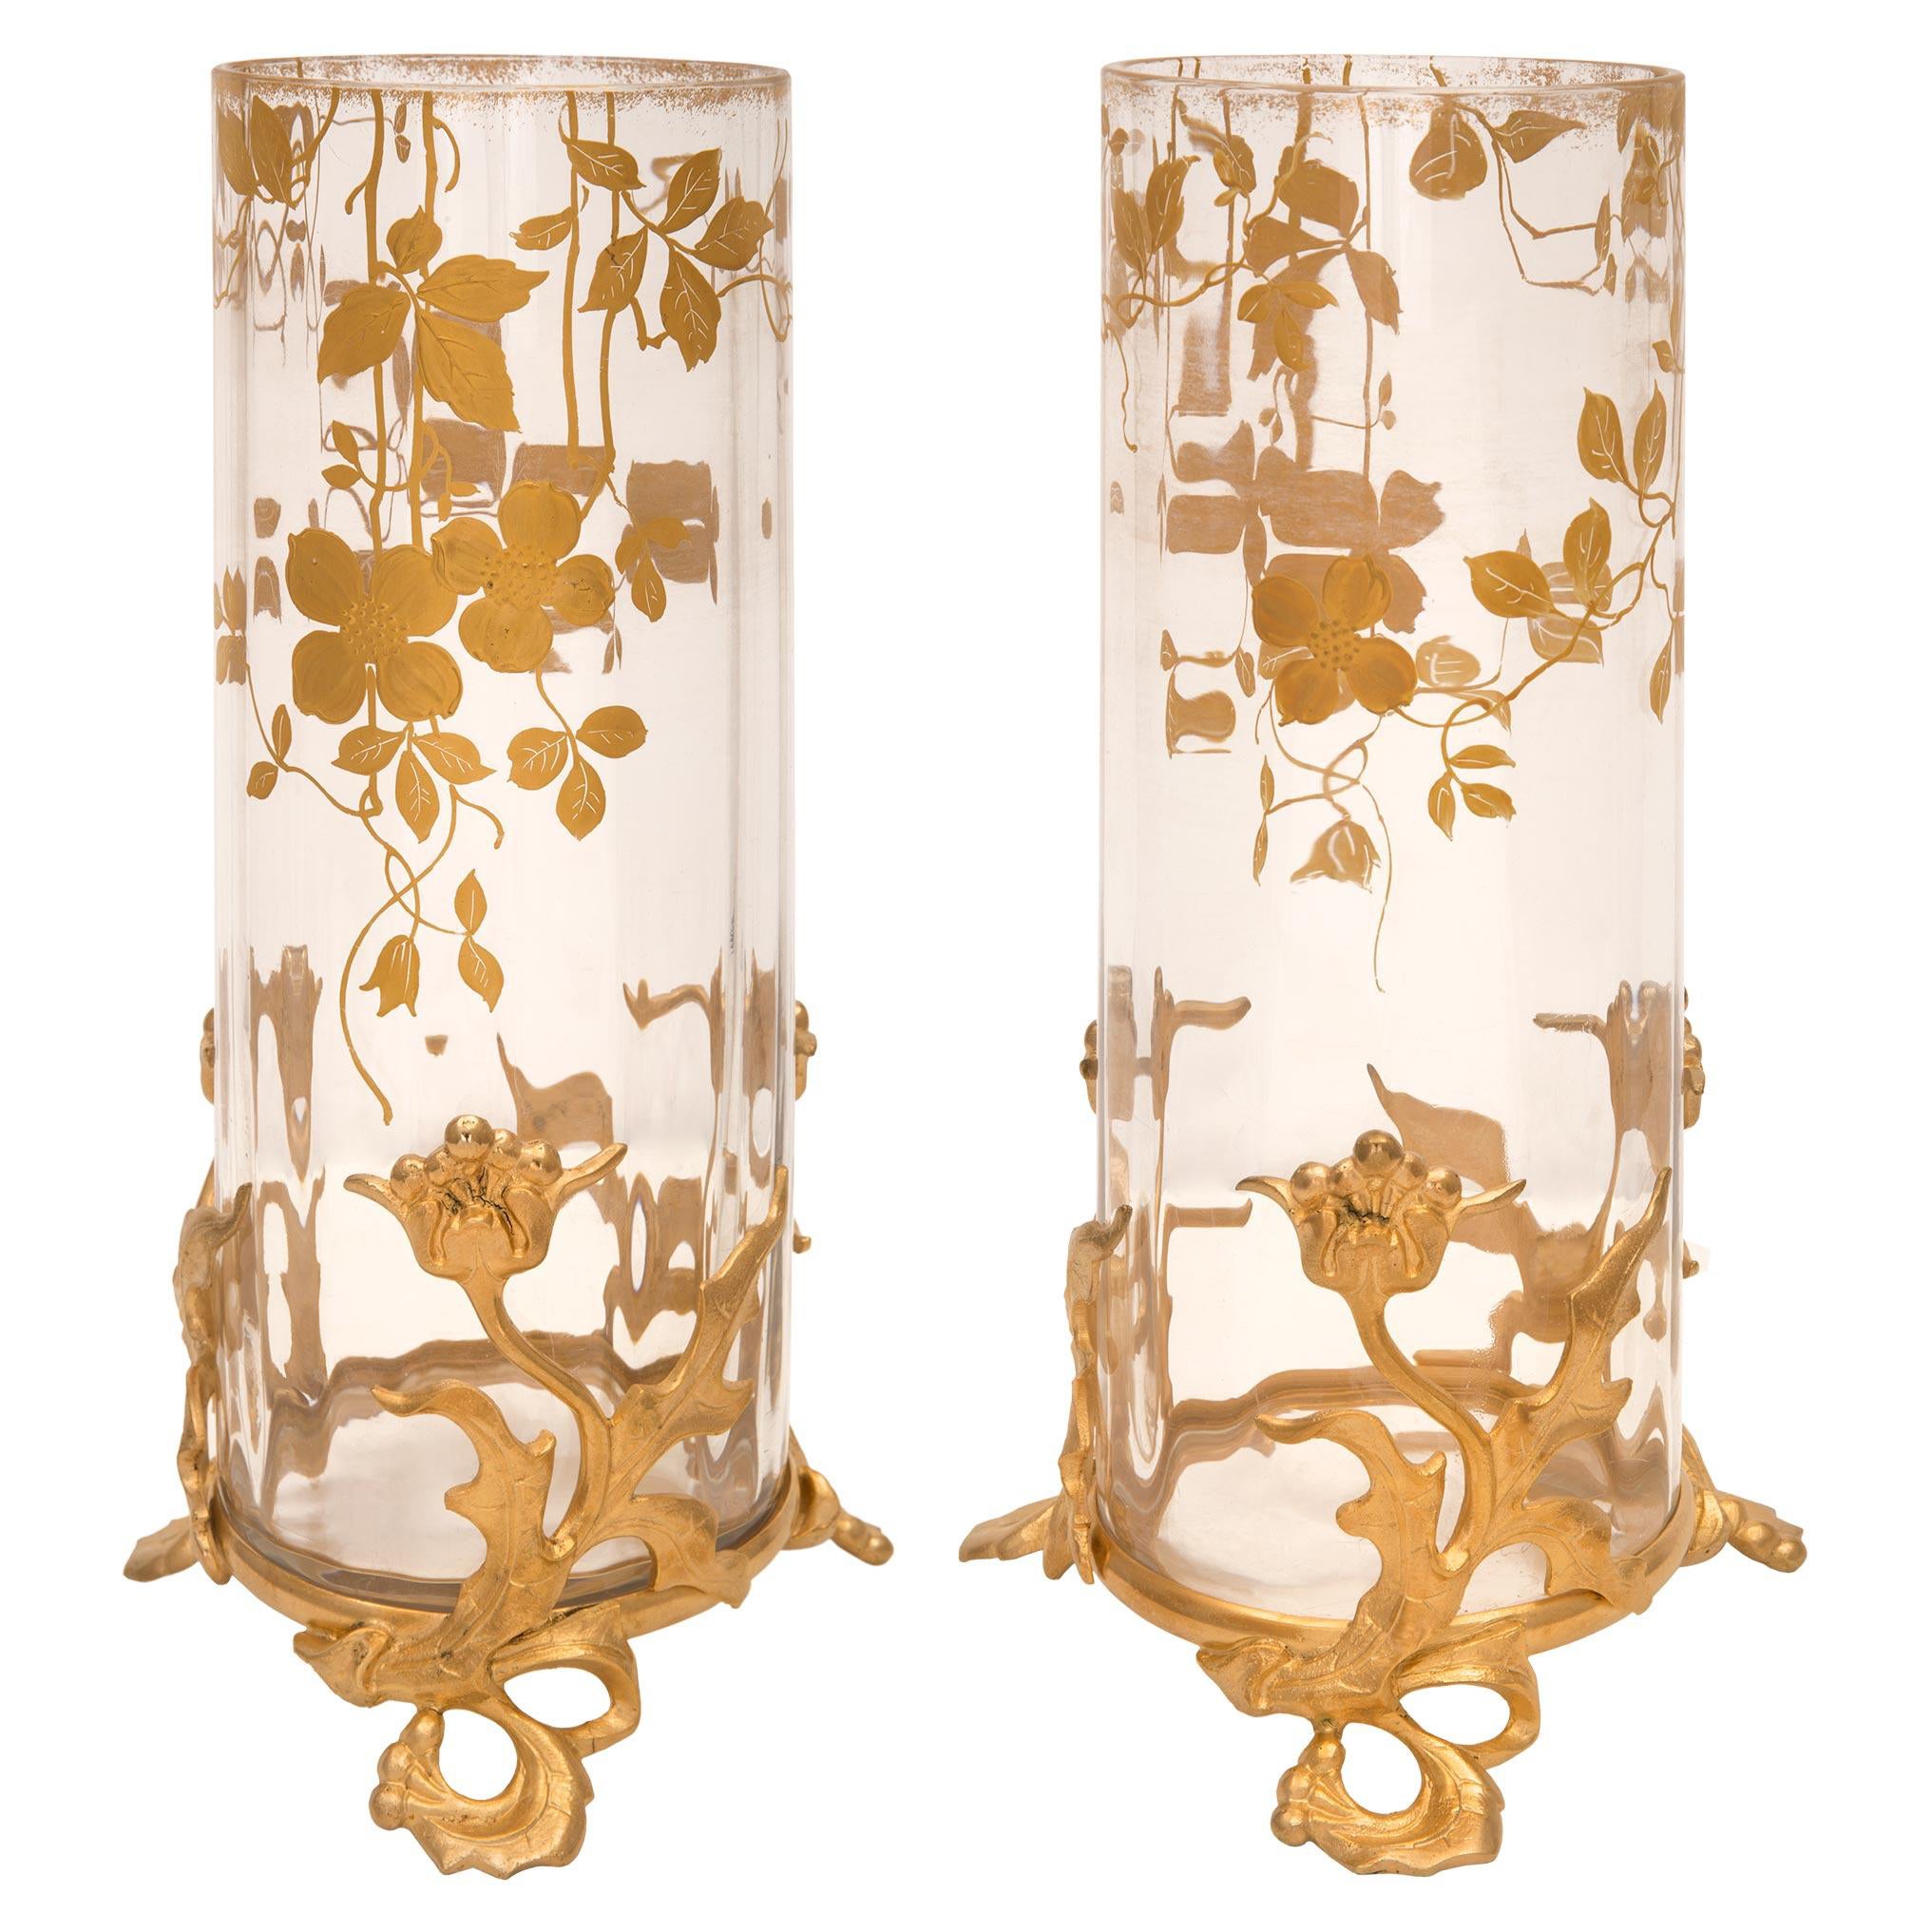 Pair of French Turn of the Century Art Nouveau Period Baccarat Vases